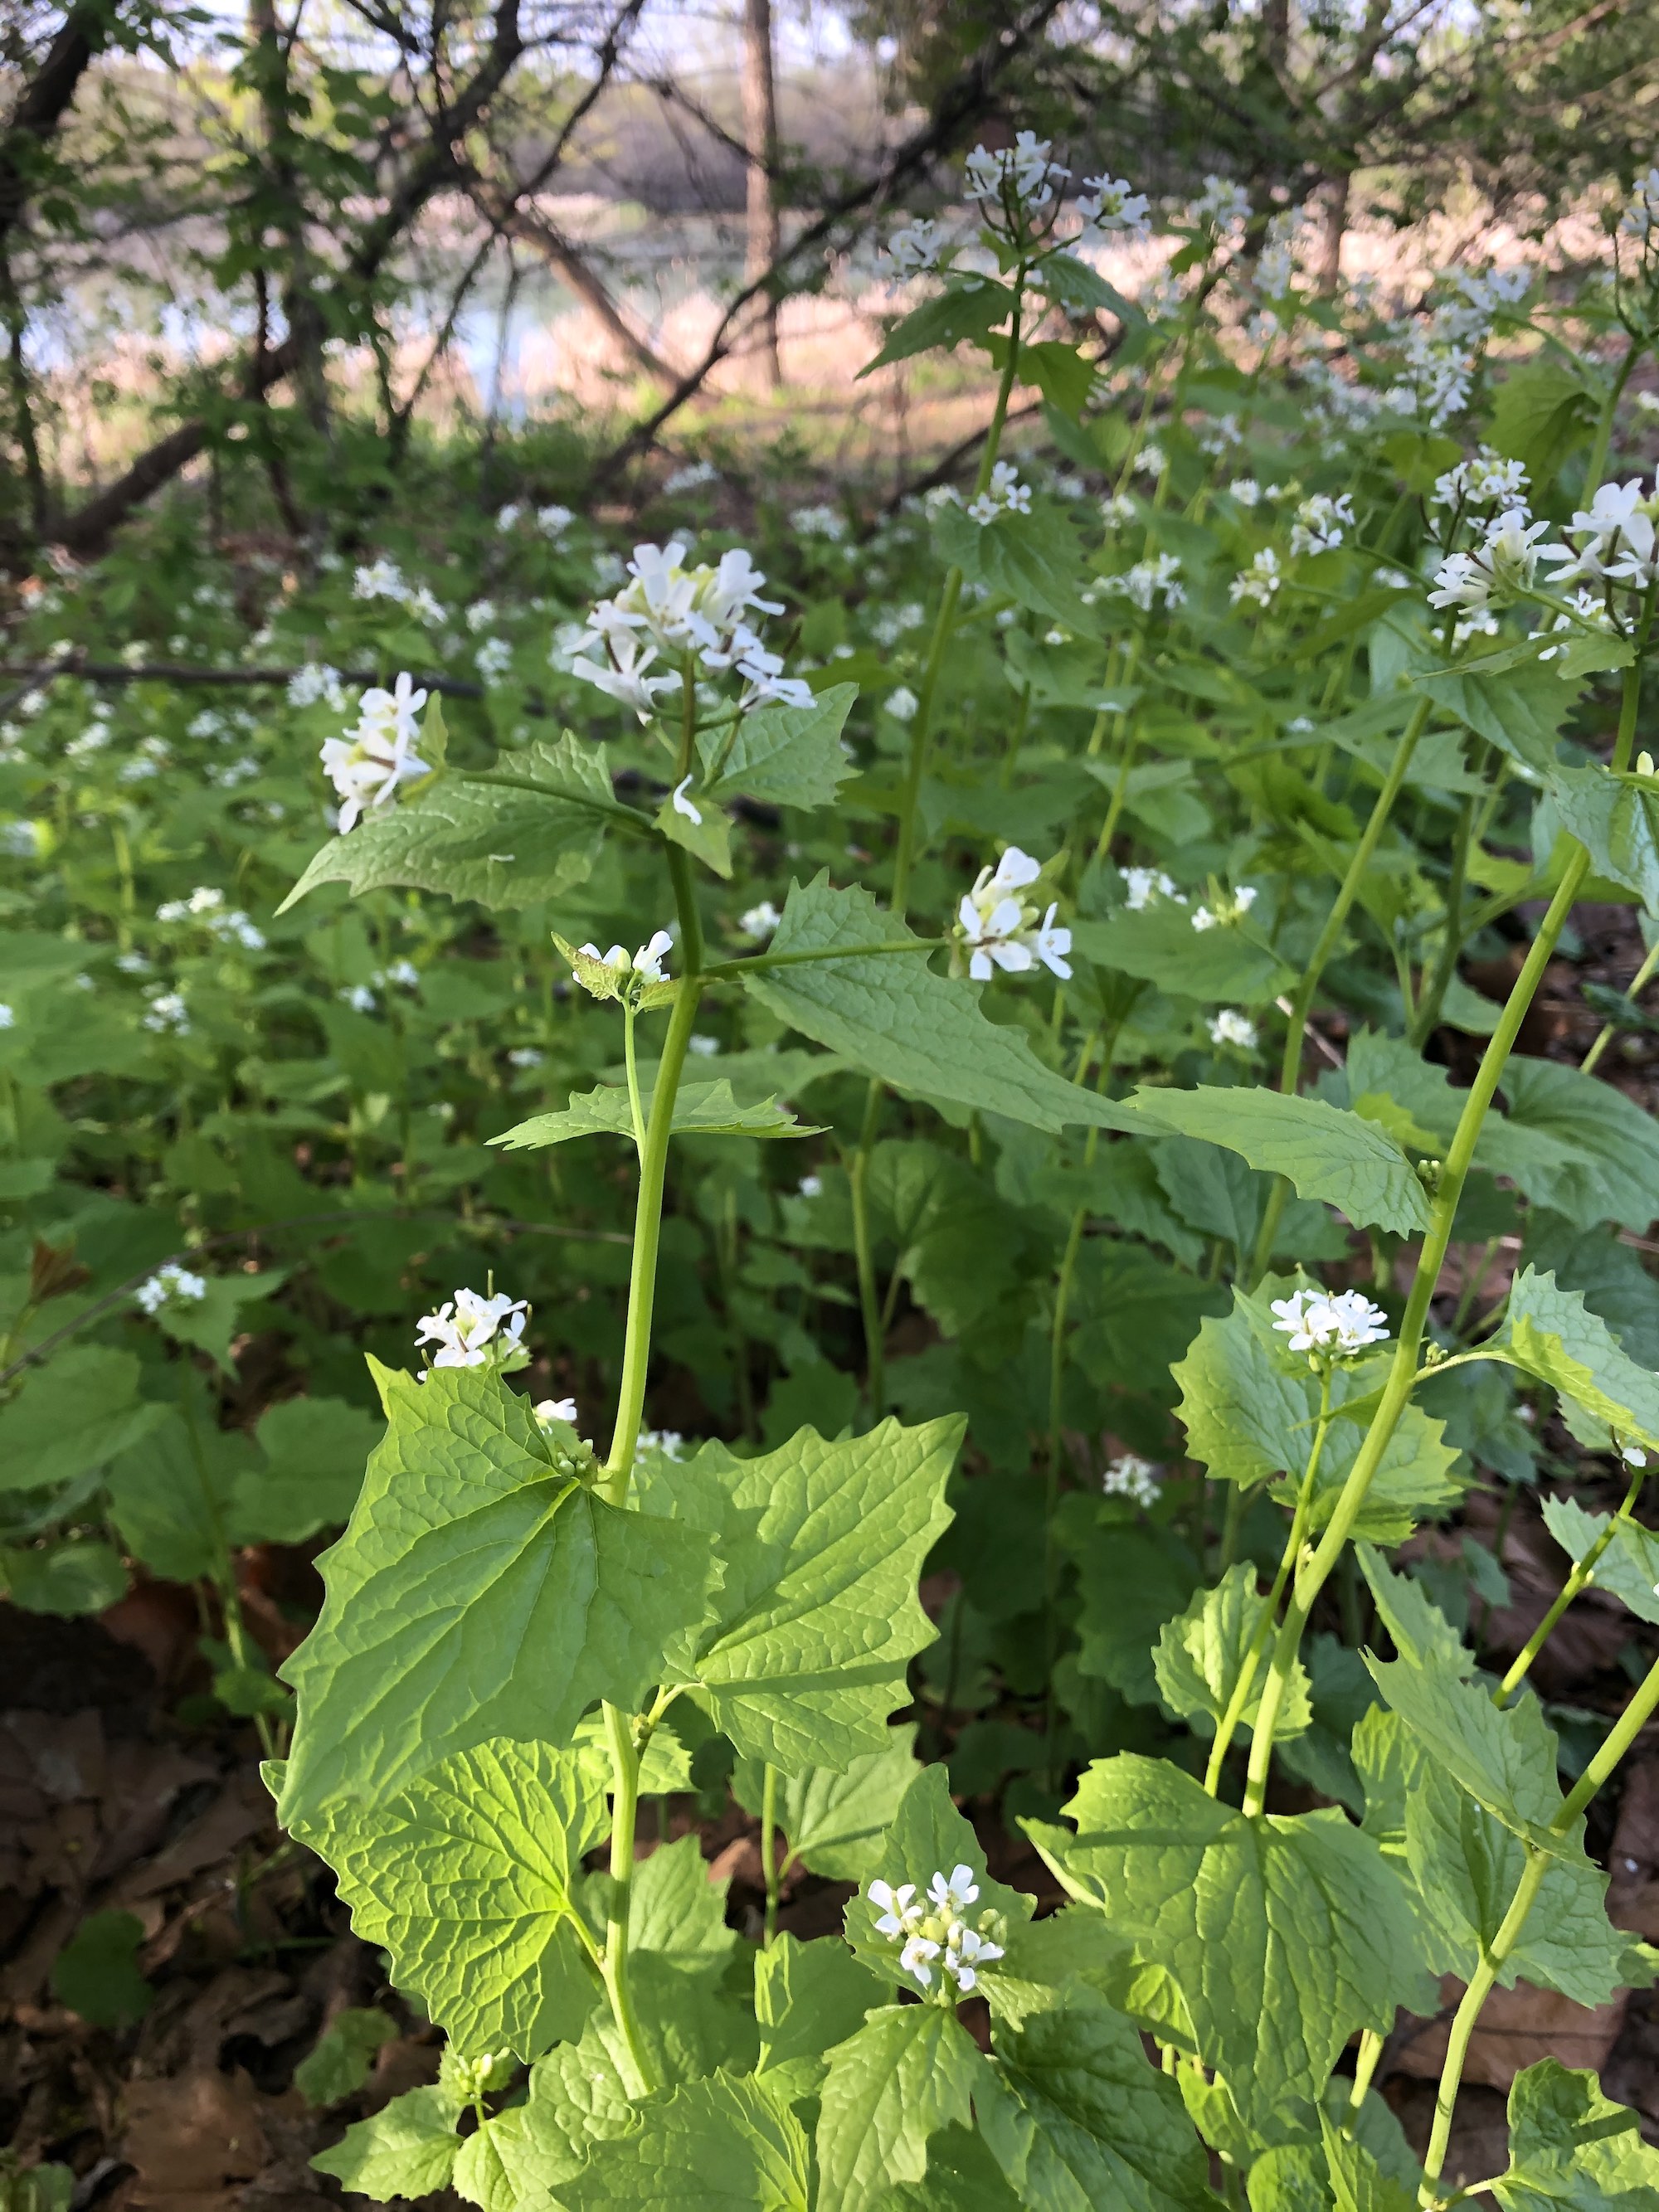 Garlic Mustard by Duck Pond in Madison, Wisconsin on May 13, 2020.